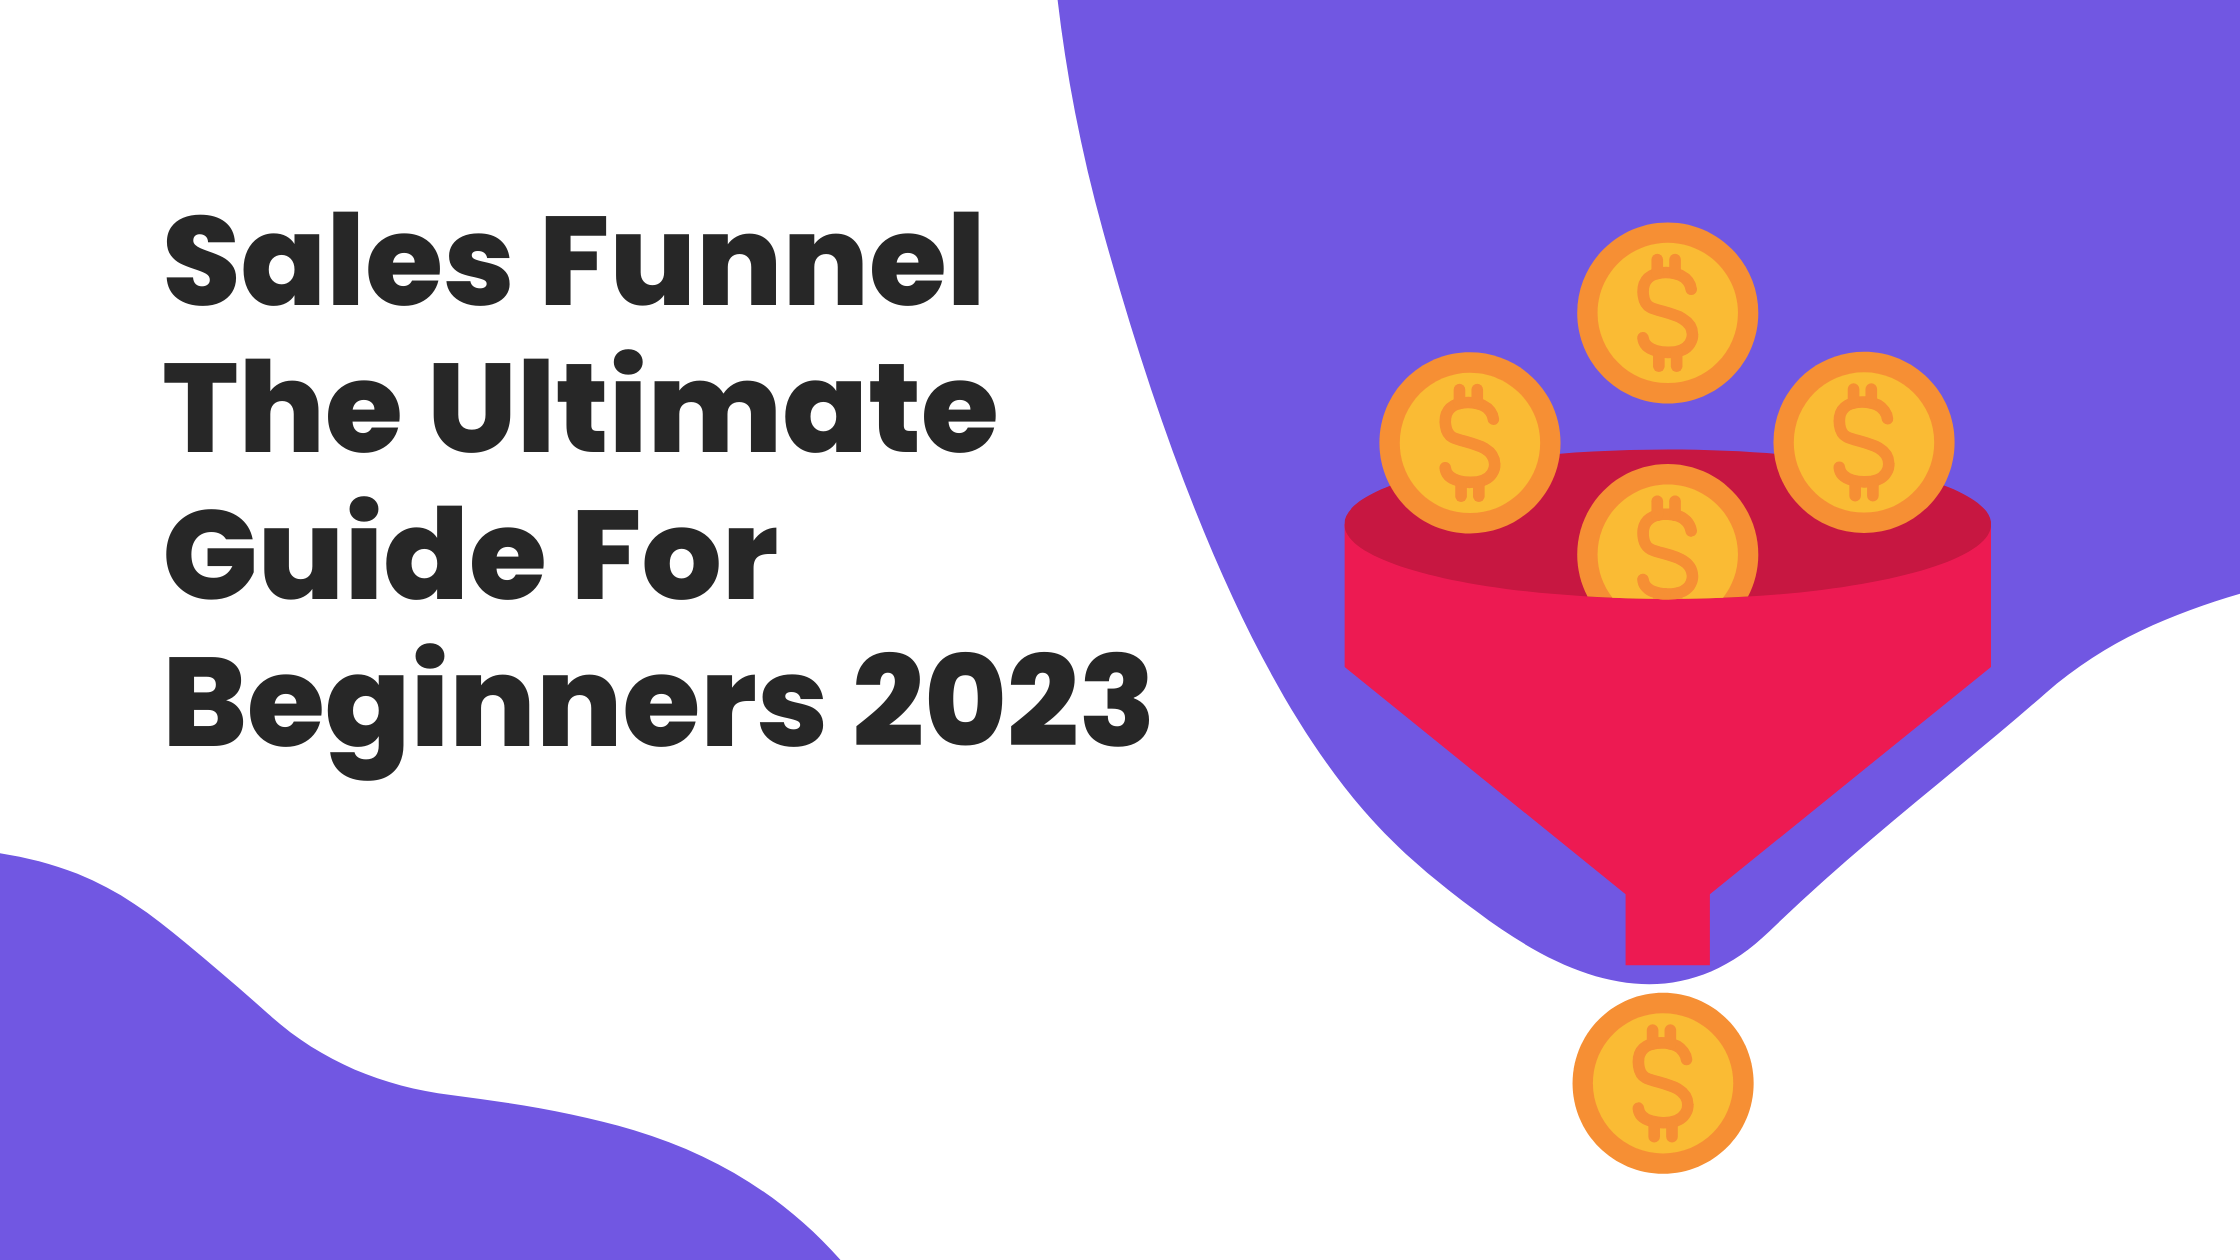 Sales Funnel The Ultimate Guide For Beginners